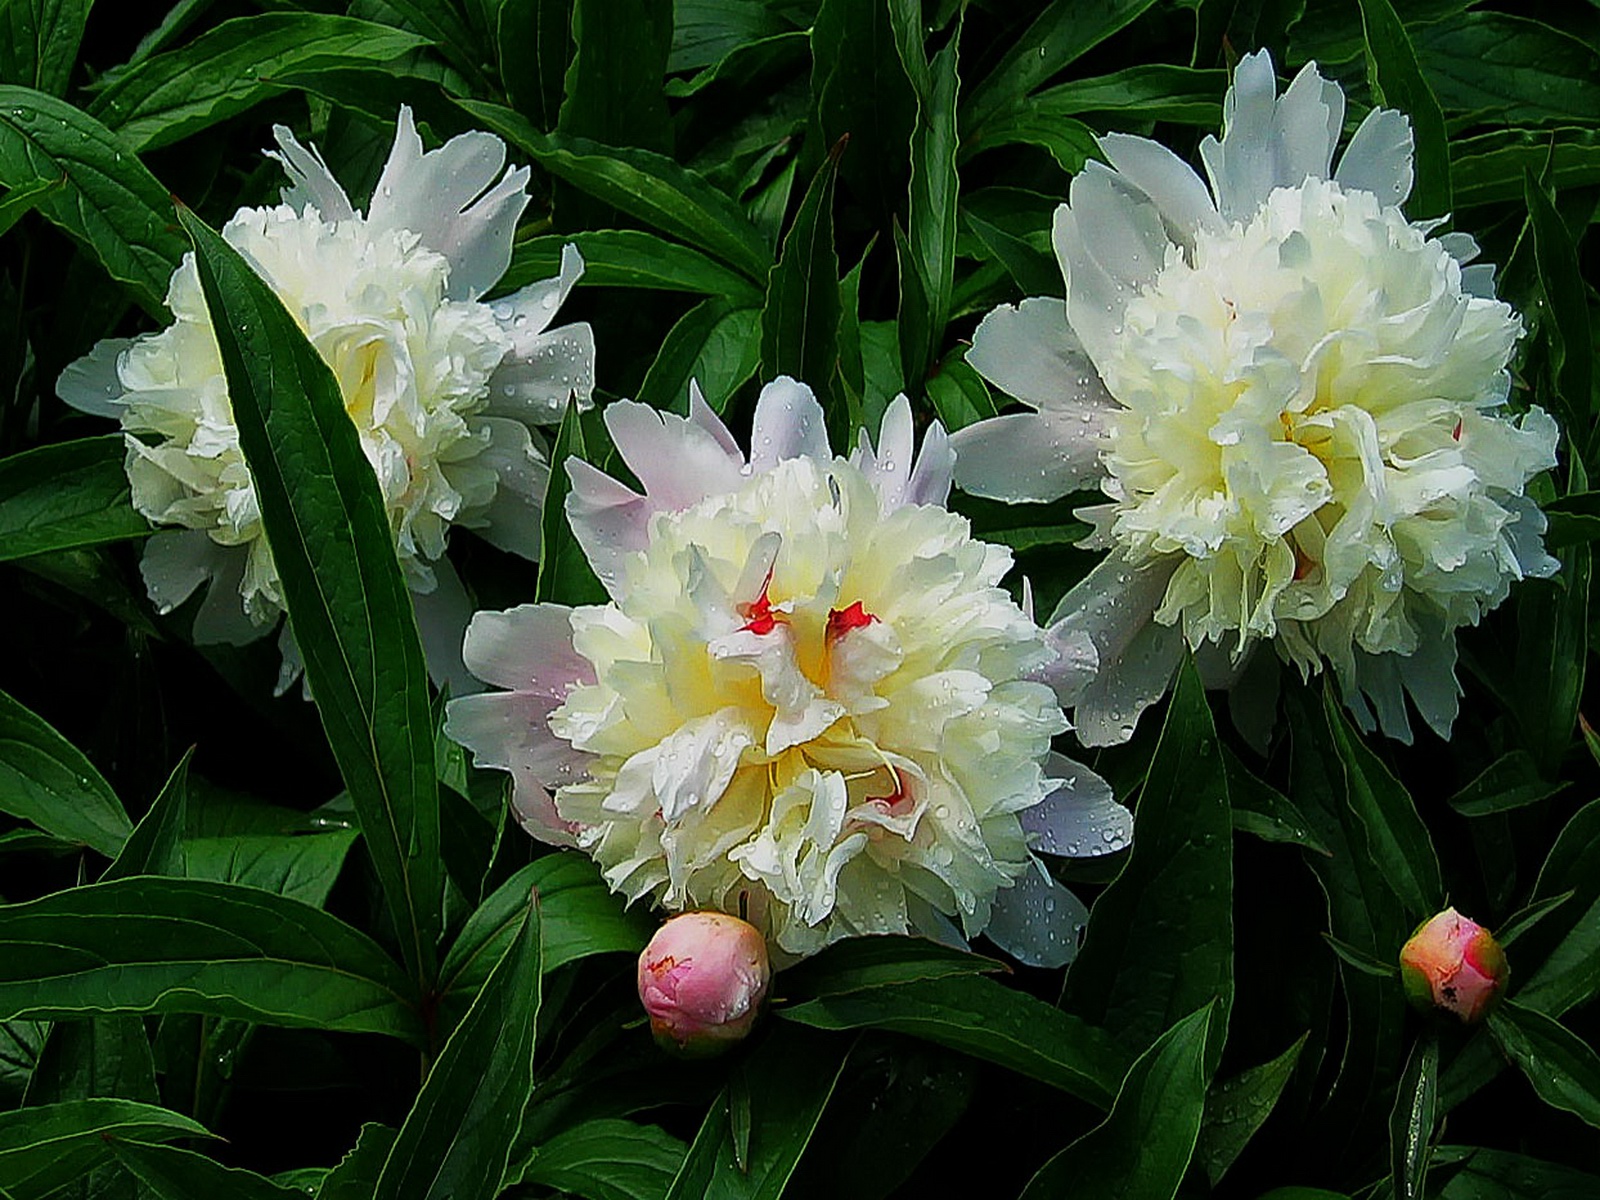 The fragrance of Peonies fills the yard and vase.